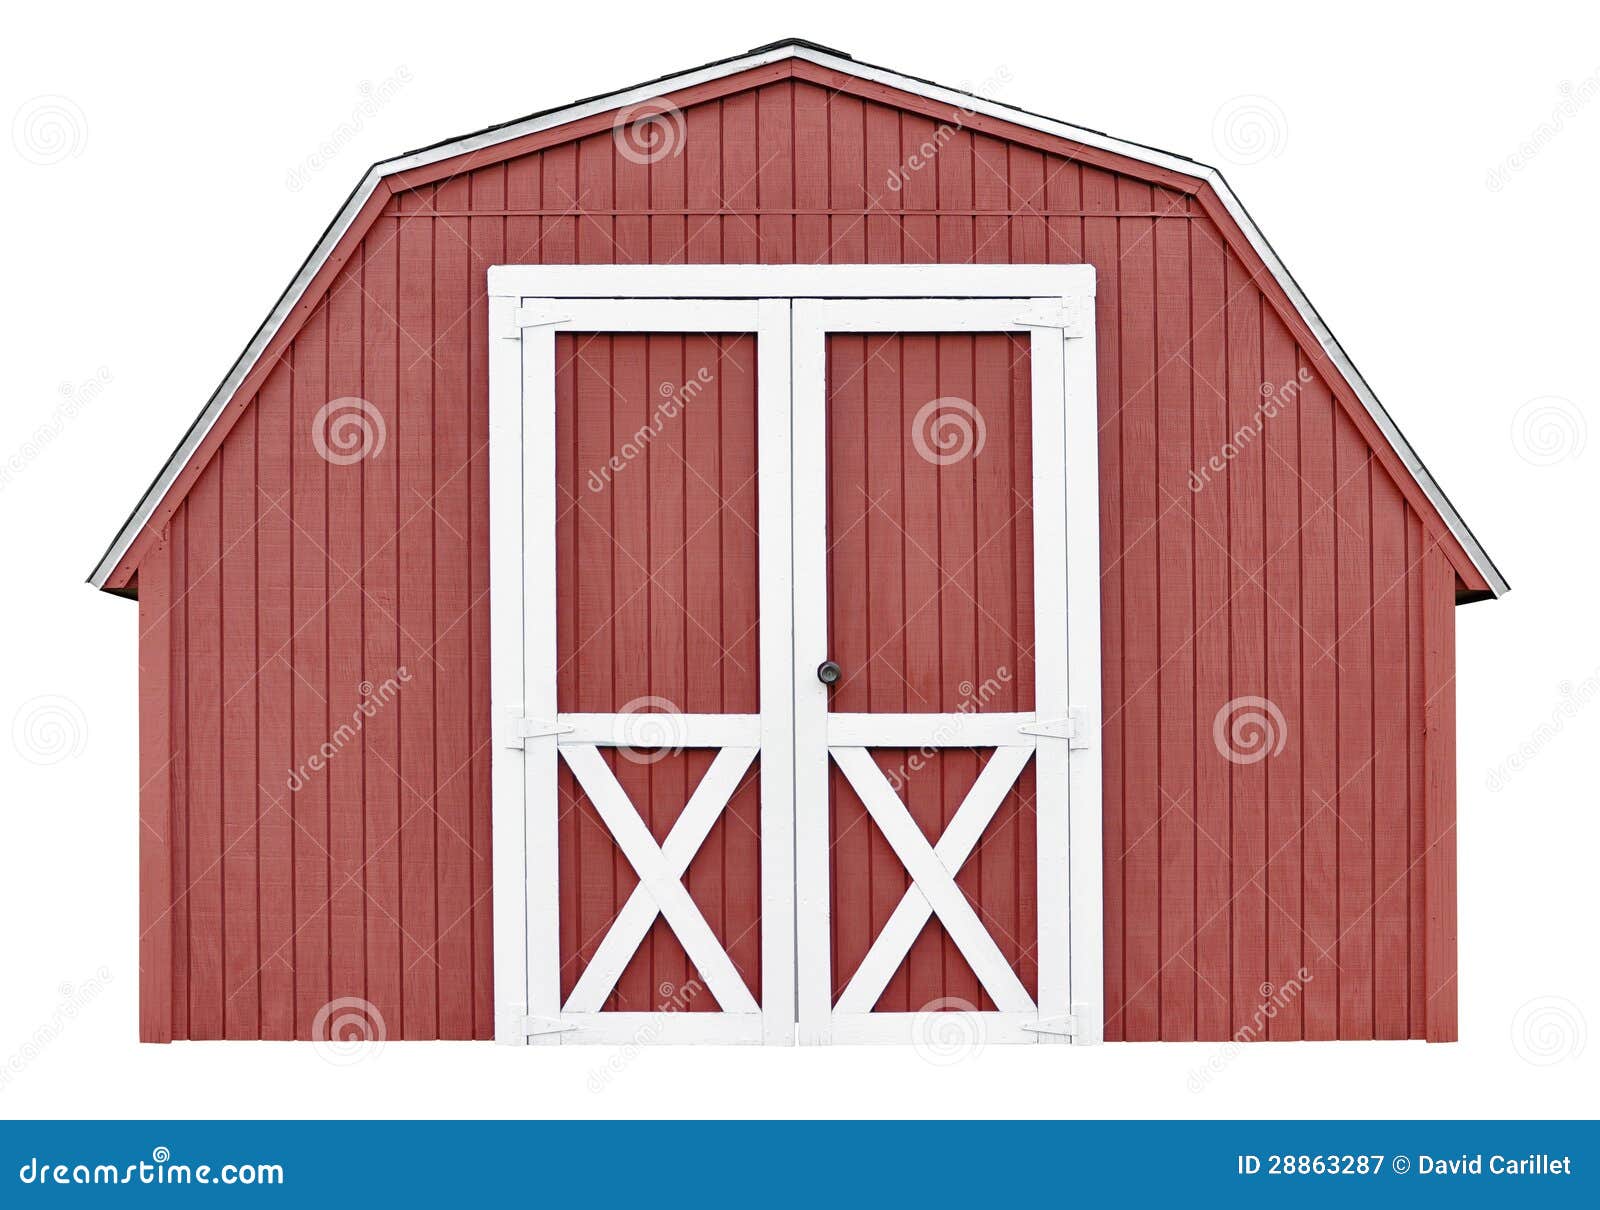 clipart garden shed - photo #32